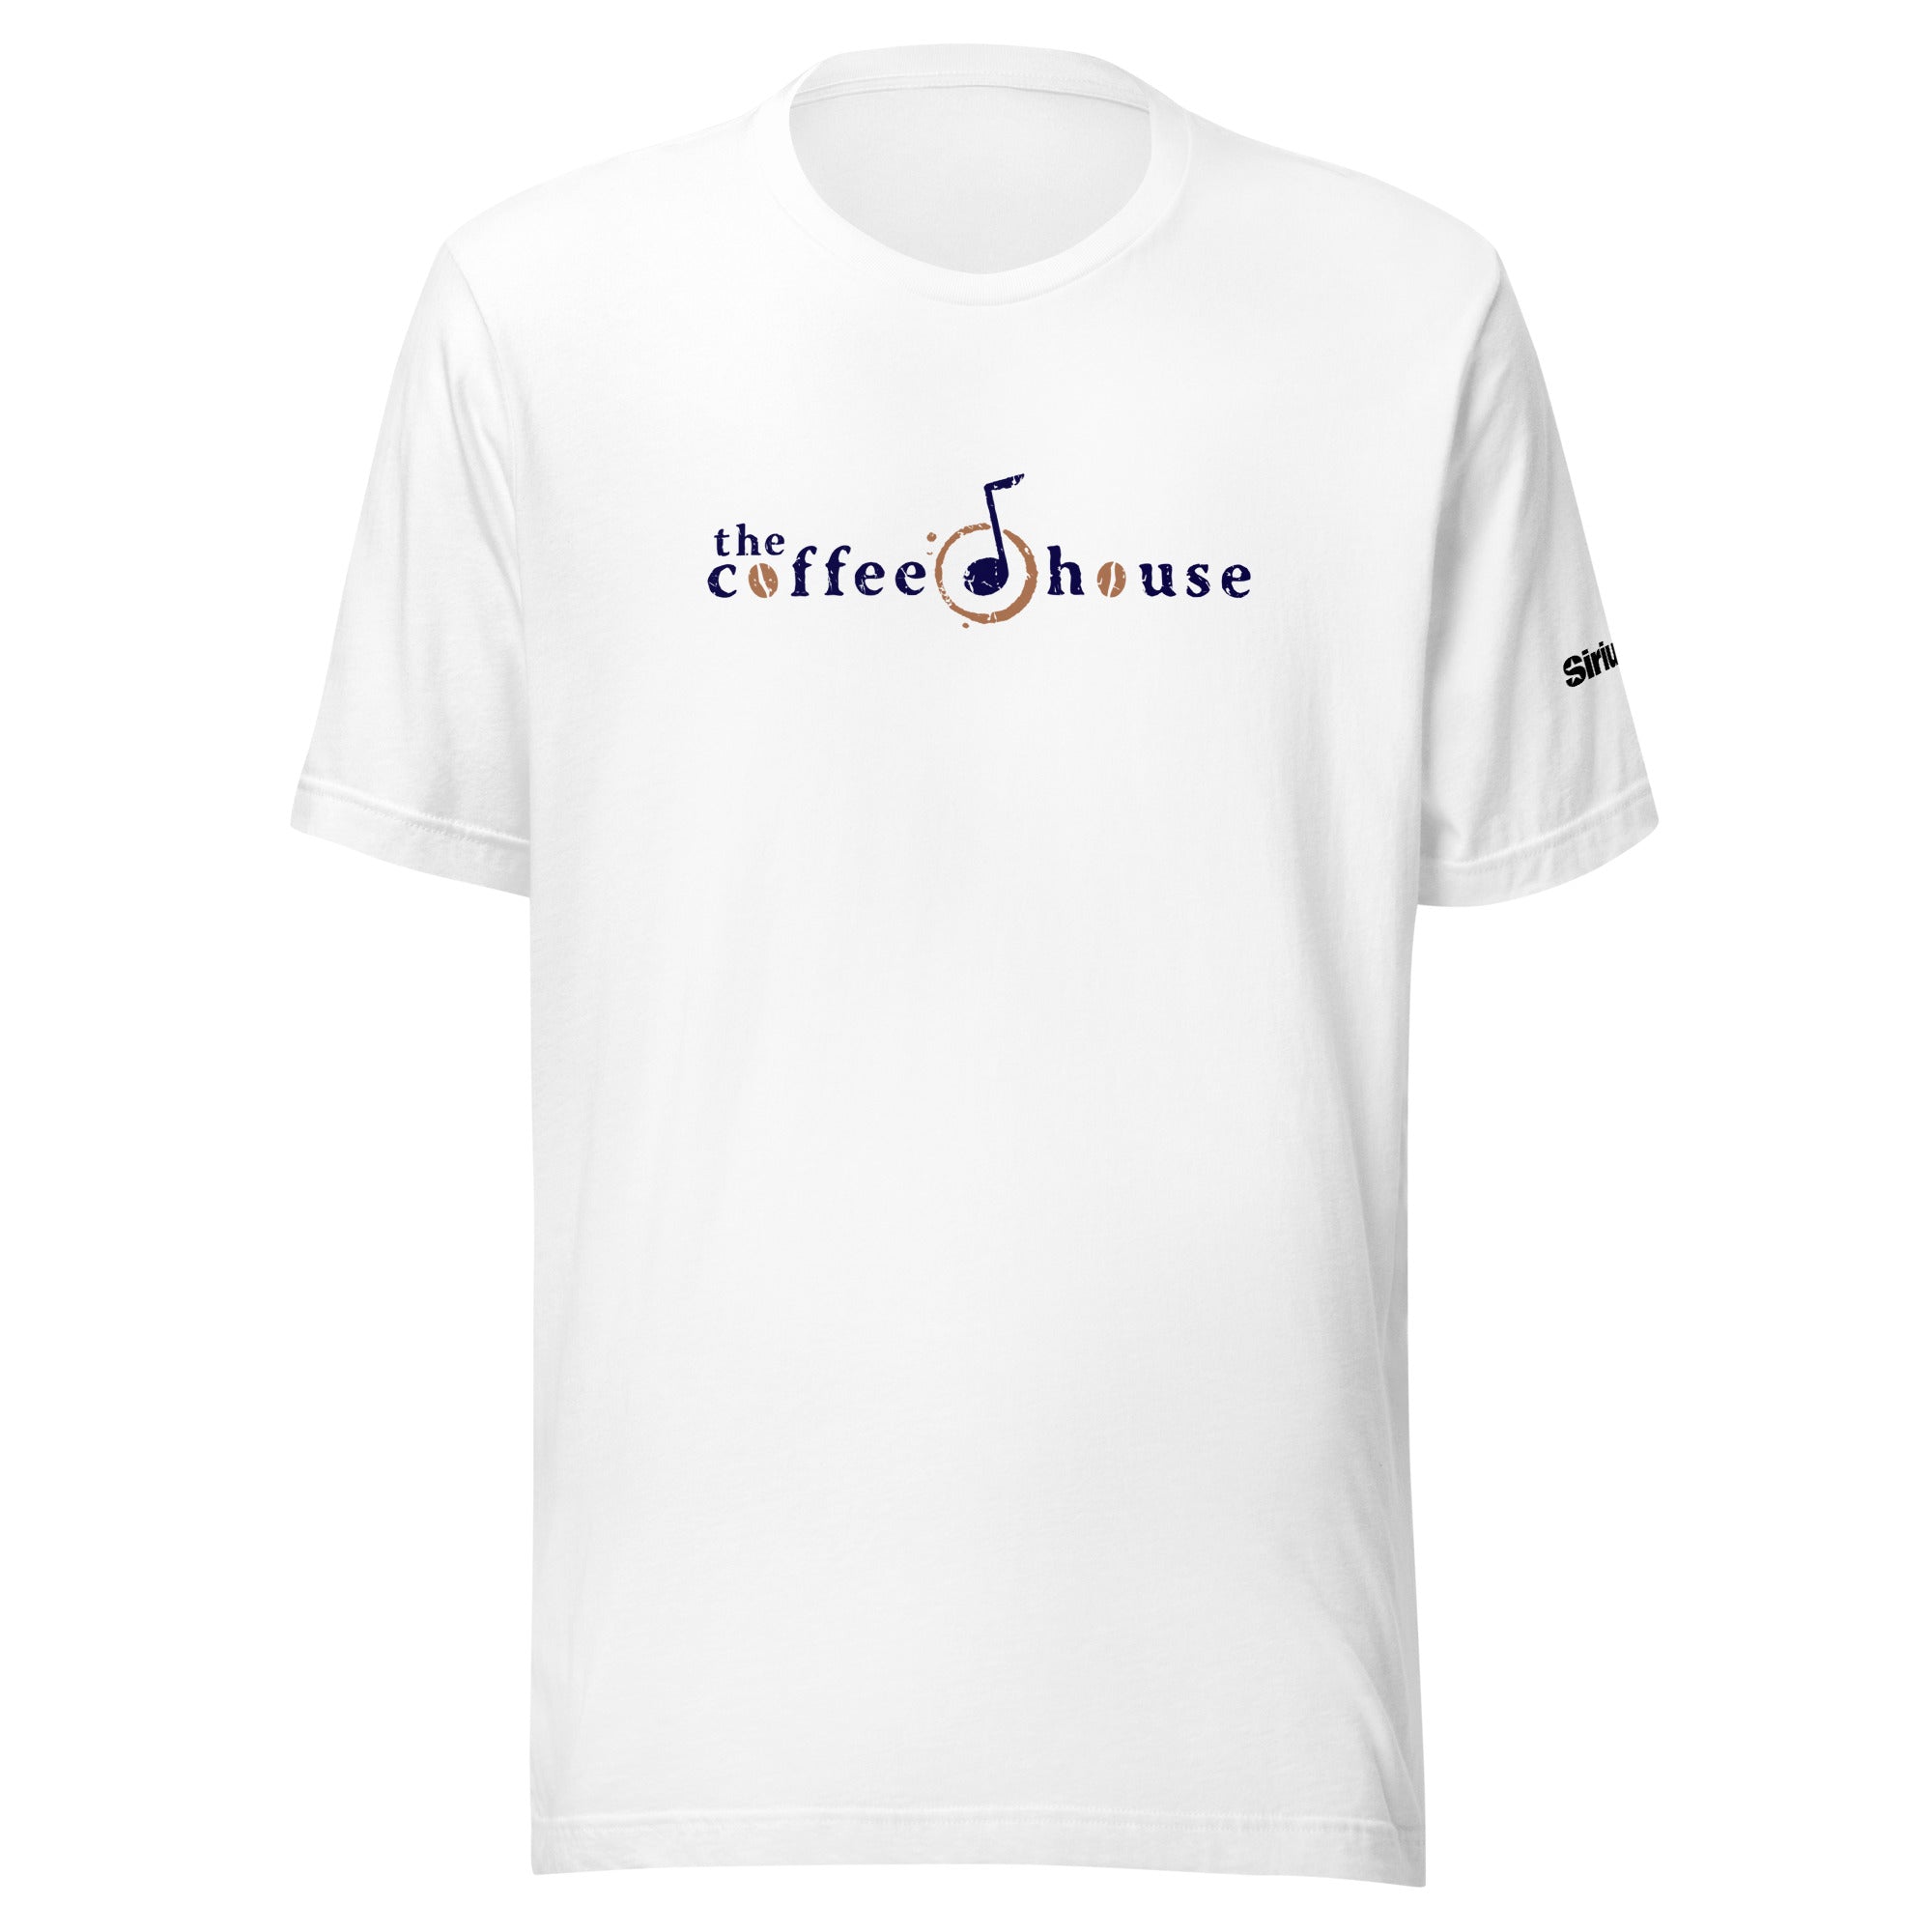 The Coffee House: T-shirt (White)